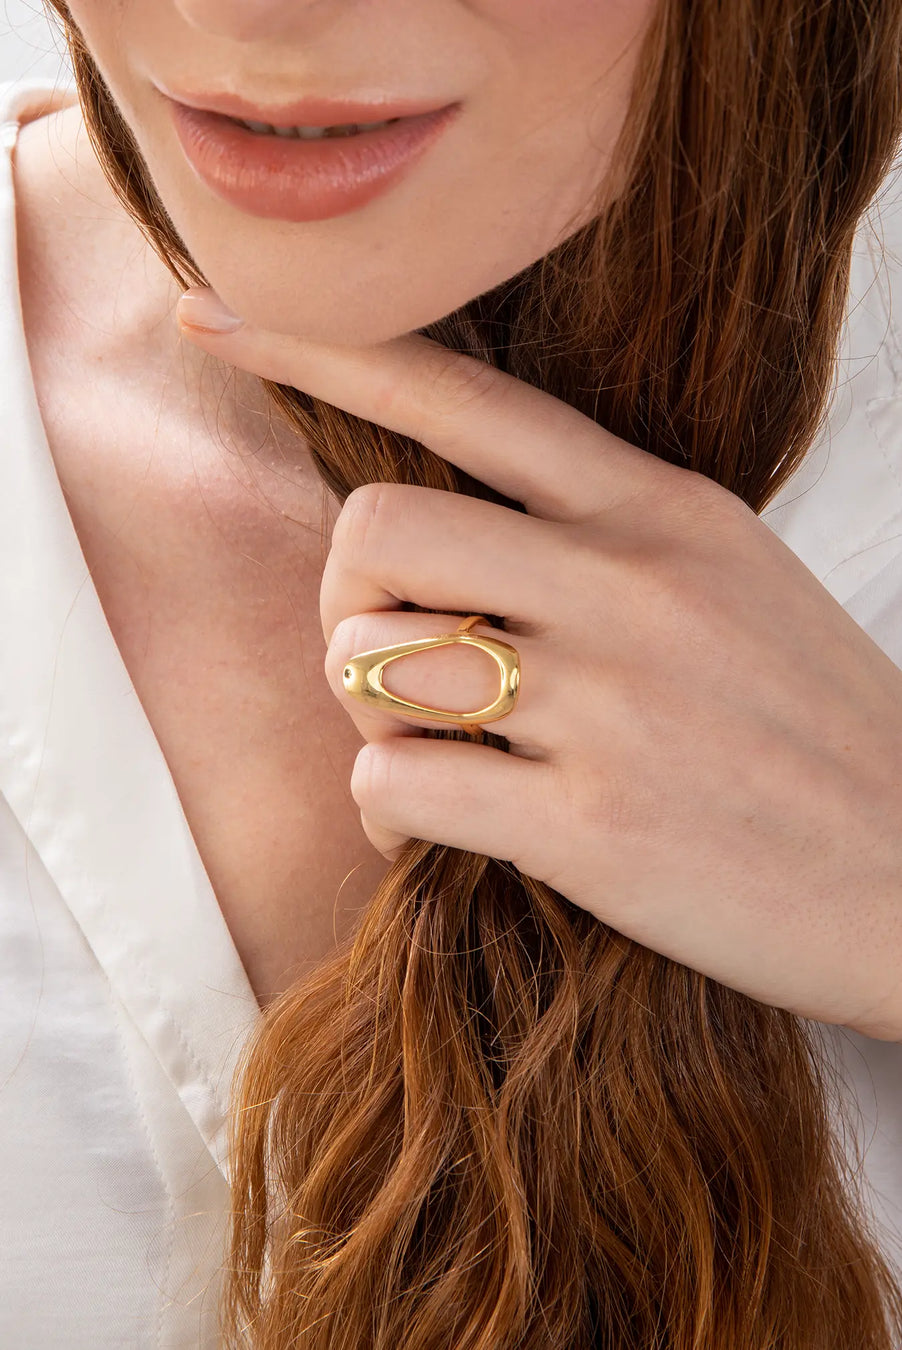 HEXAGON Ring. Elongated hexagon-shaped ring, open-ended, can fit with US sizes 5-7, 18K gold vermeil, handmade, hypoallergenic, water-resistant